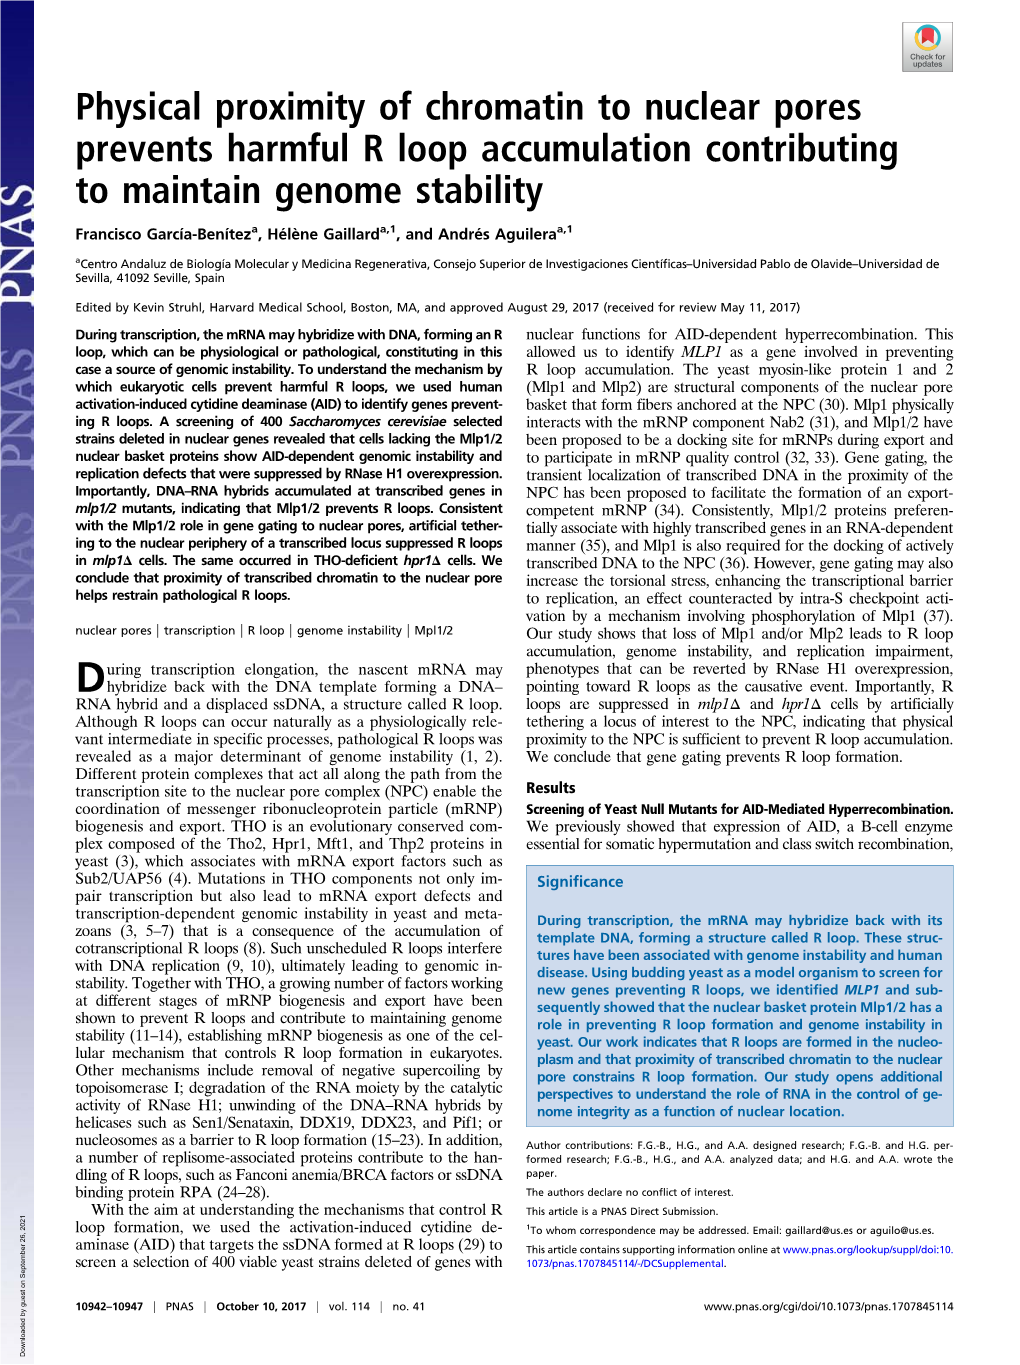 Physical Proximity of Chromatin to Nuclear Pores Prevents Harmful R Loop Accumulation Contributing to Maintain Genome Stability